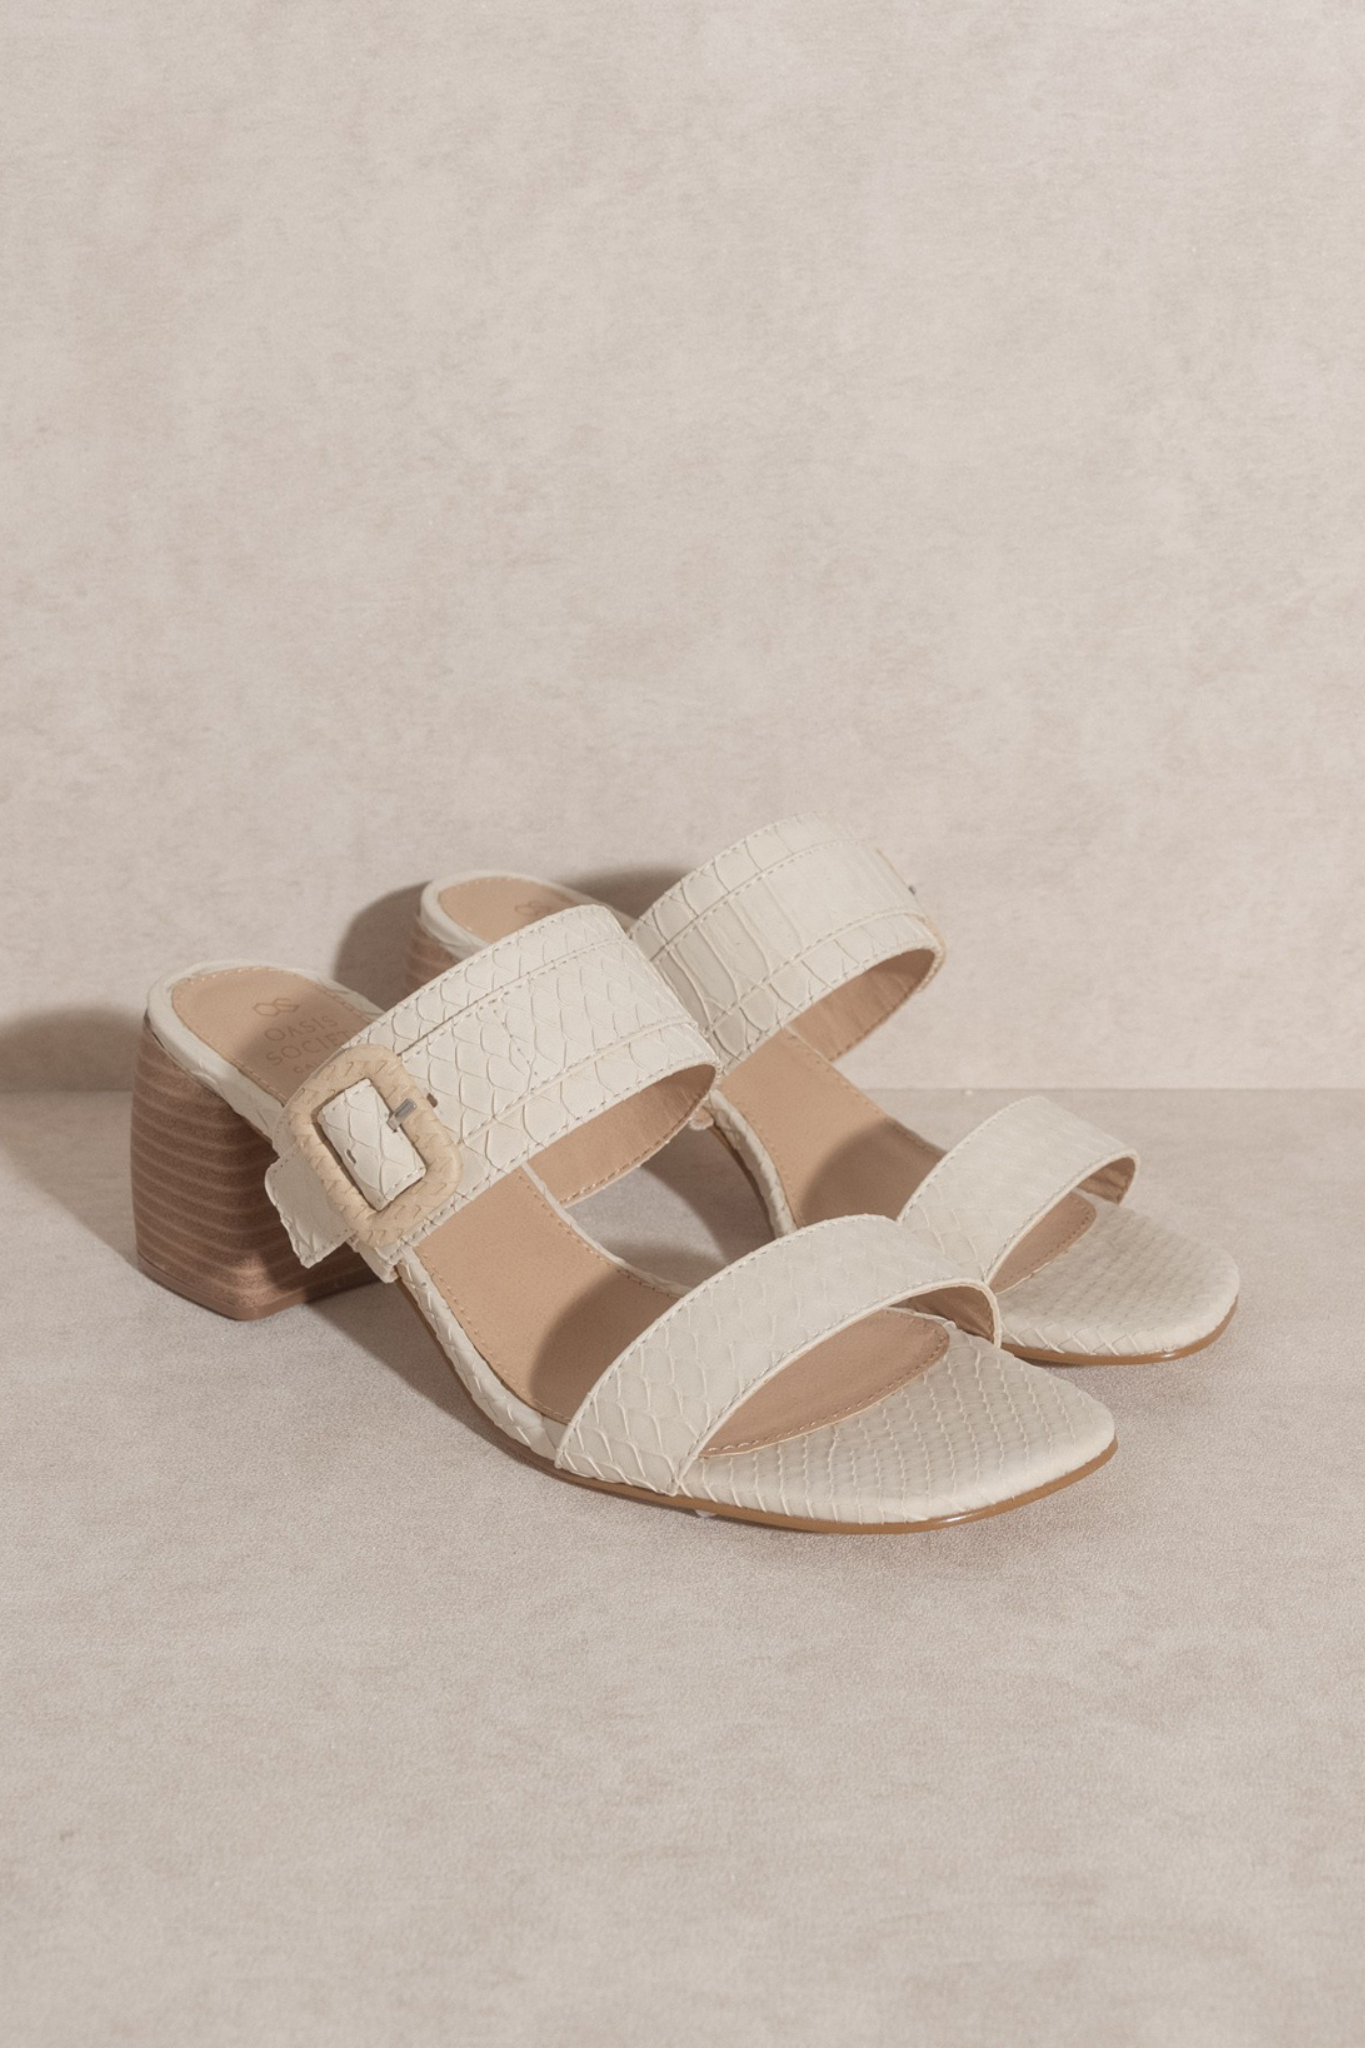 View 6 of Nicole Buckle Block Heel in Off White, a Shoes from Larrea Cove. Detail: .